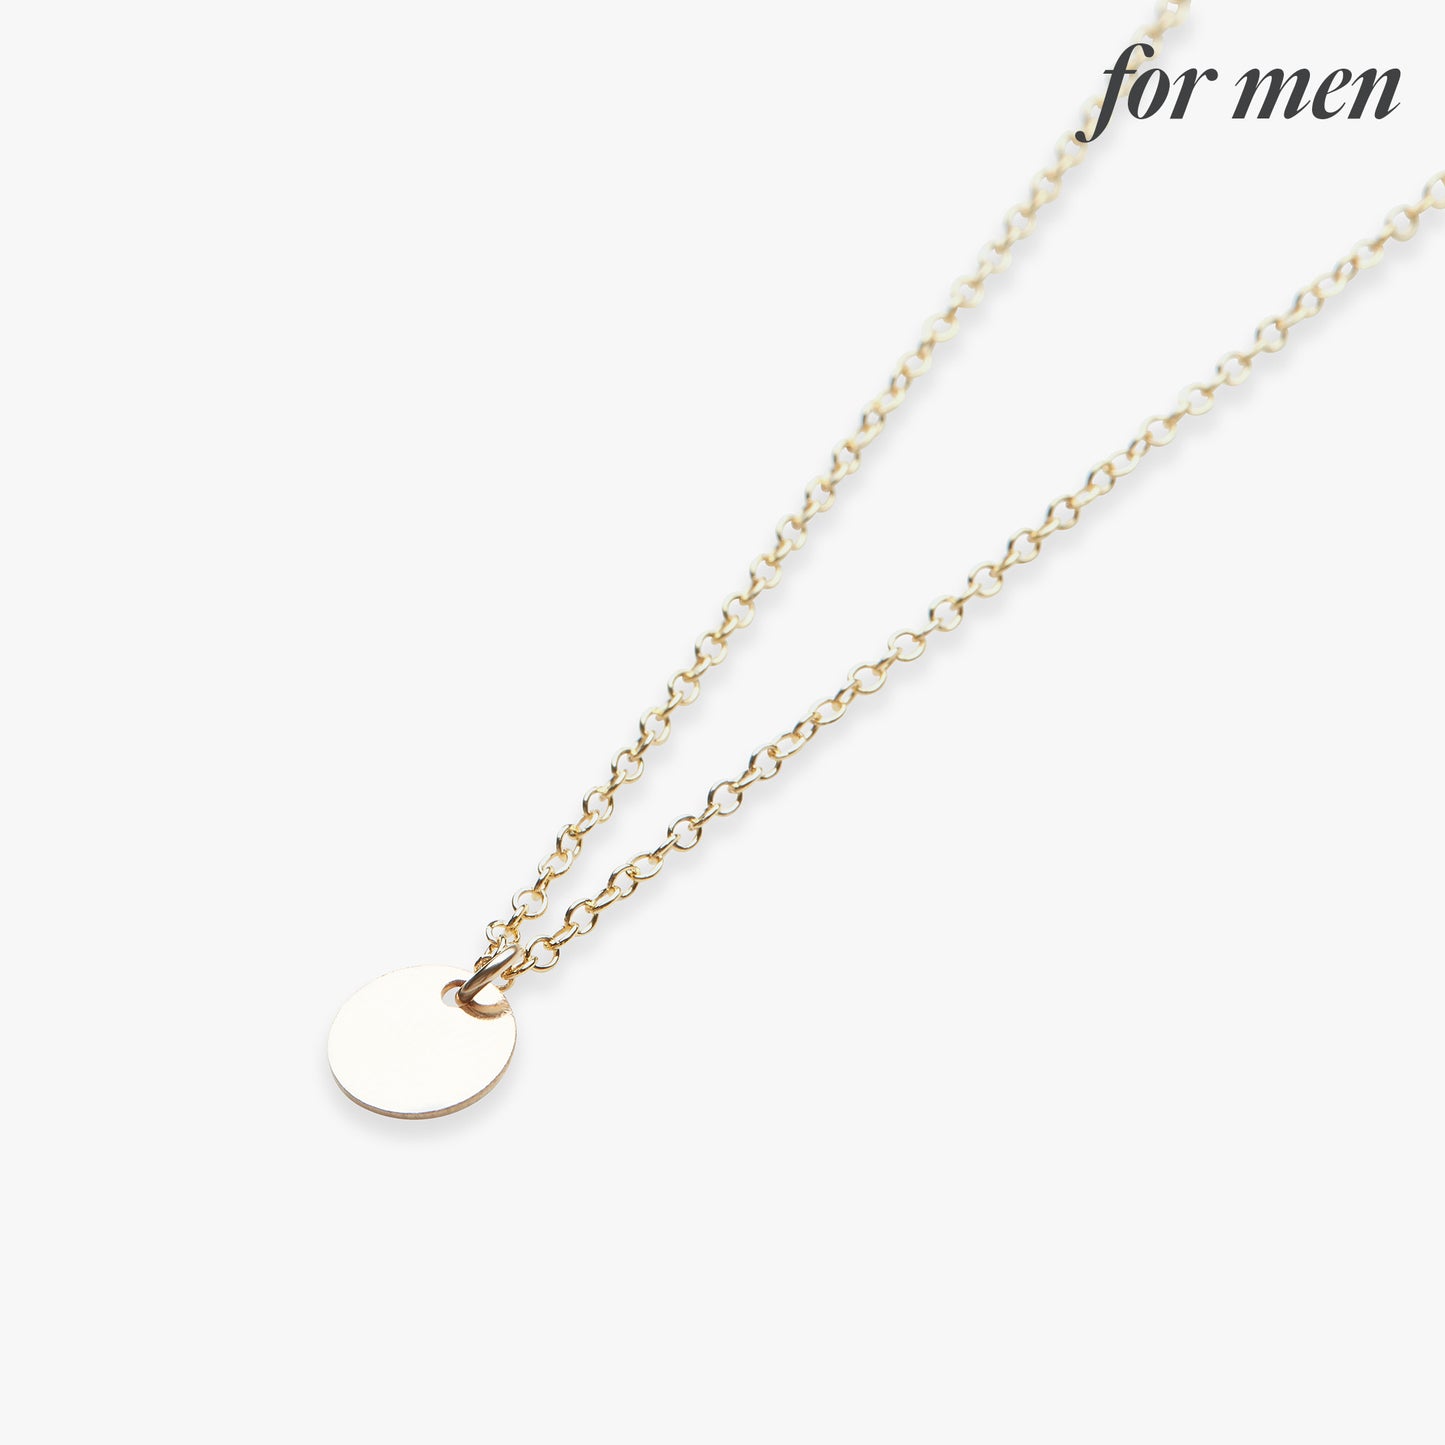 Mini coin necklace gold filled for men